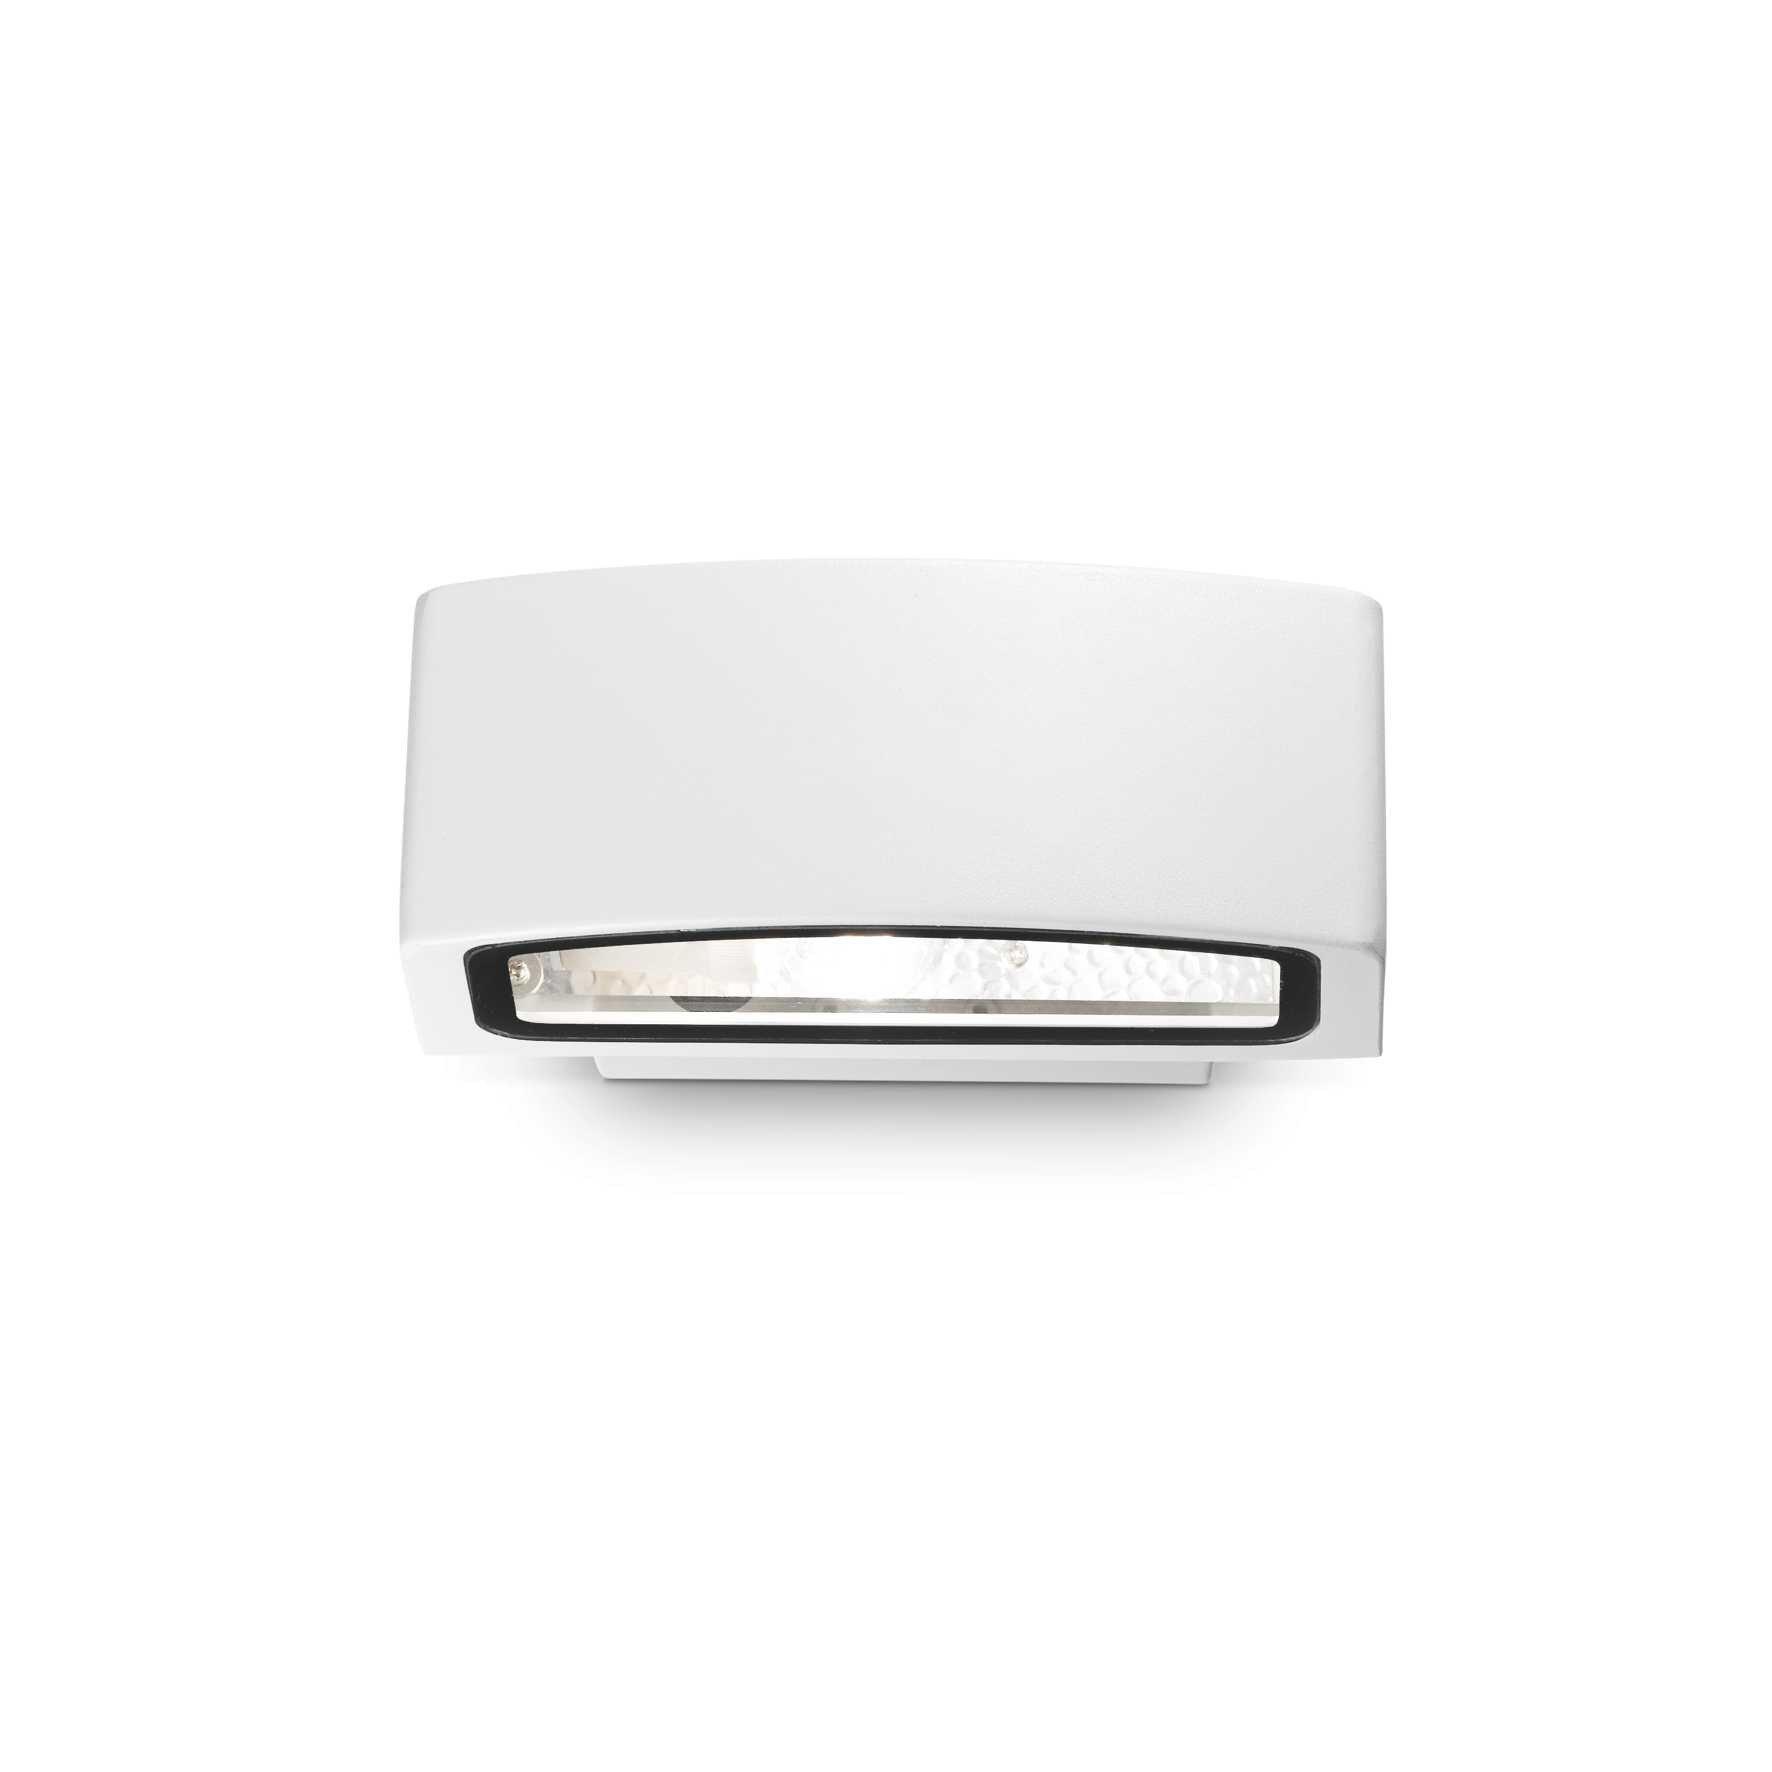 Andromeda 1 Light Outdoor Small Up Down Wall Light White Cream IP55 E27